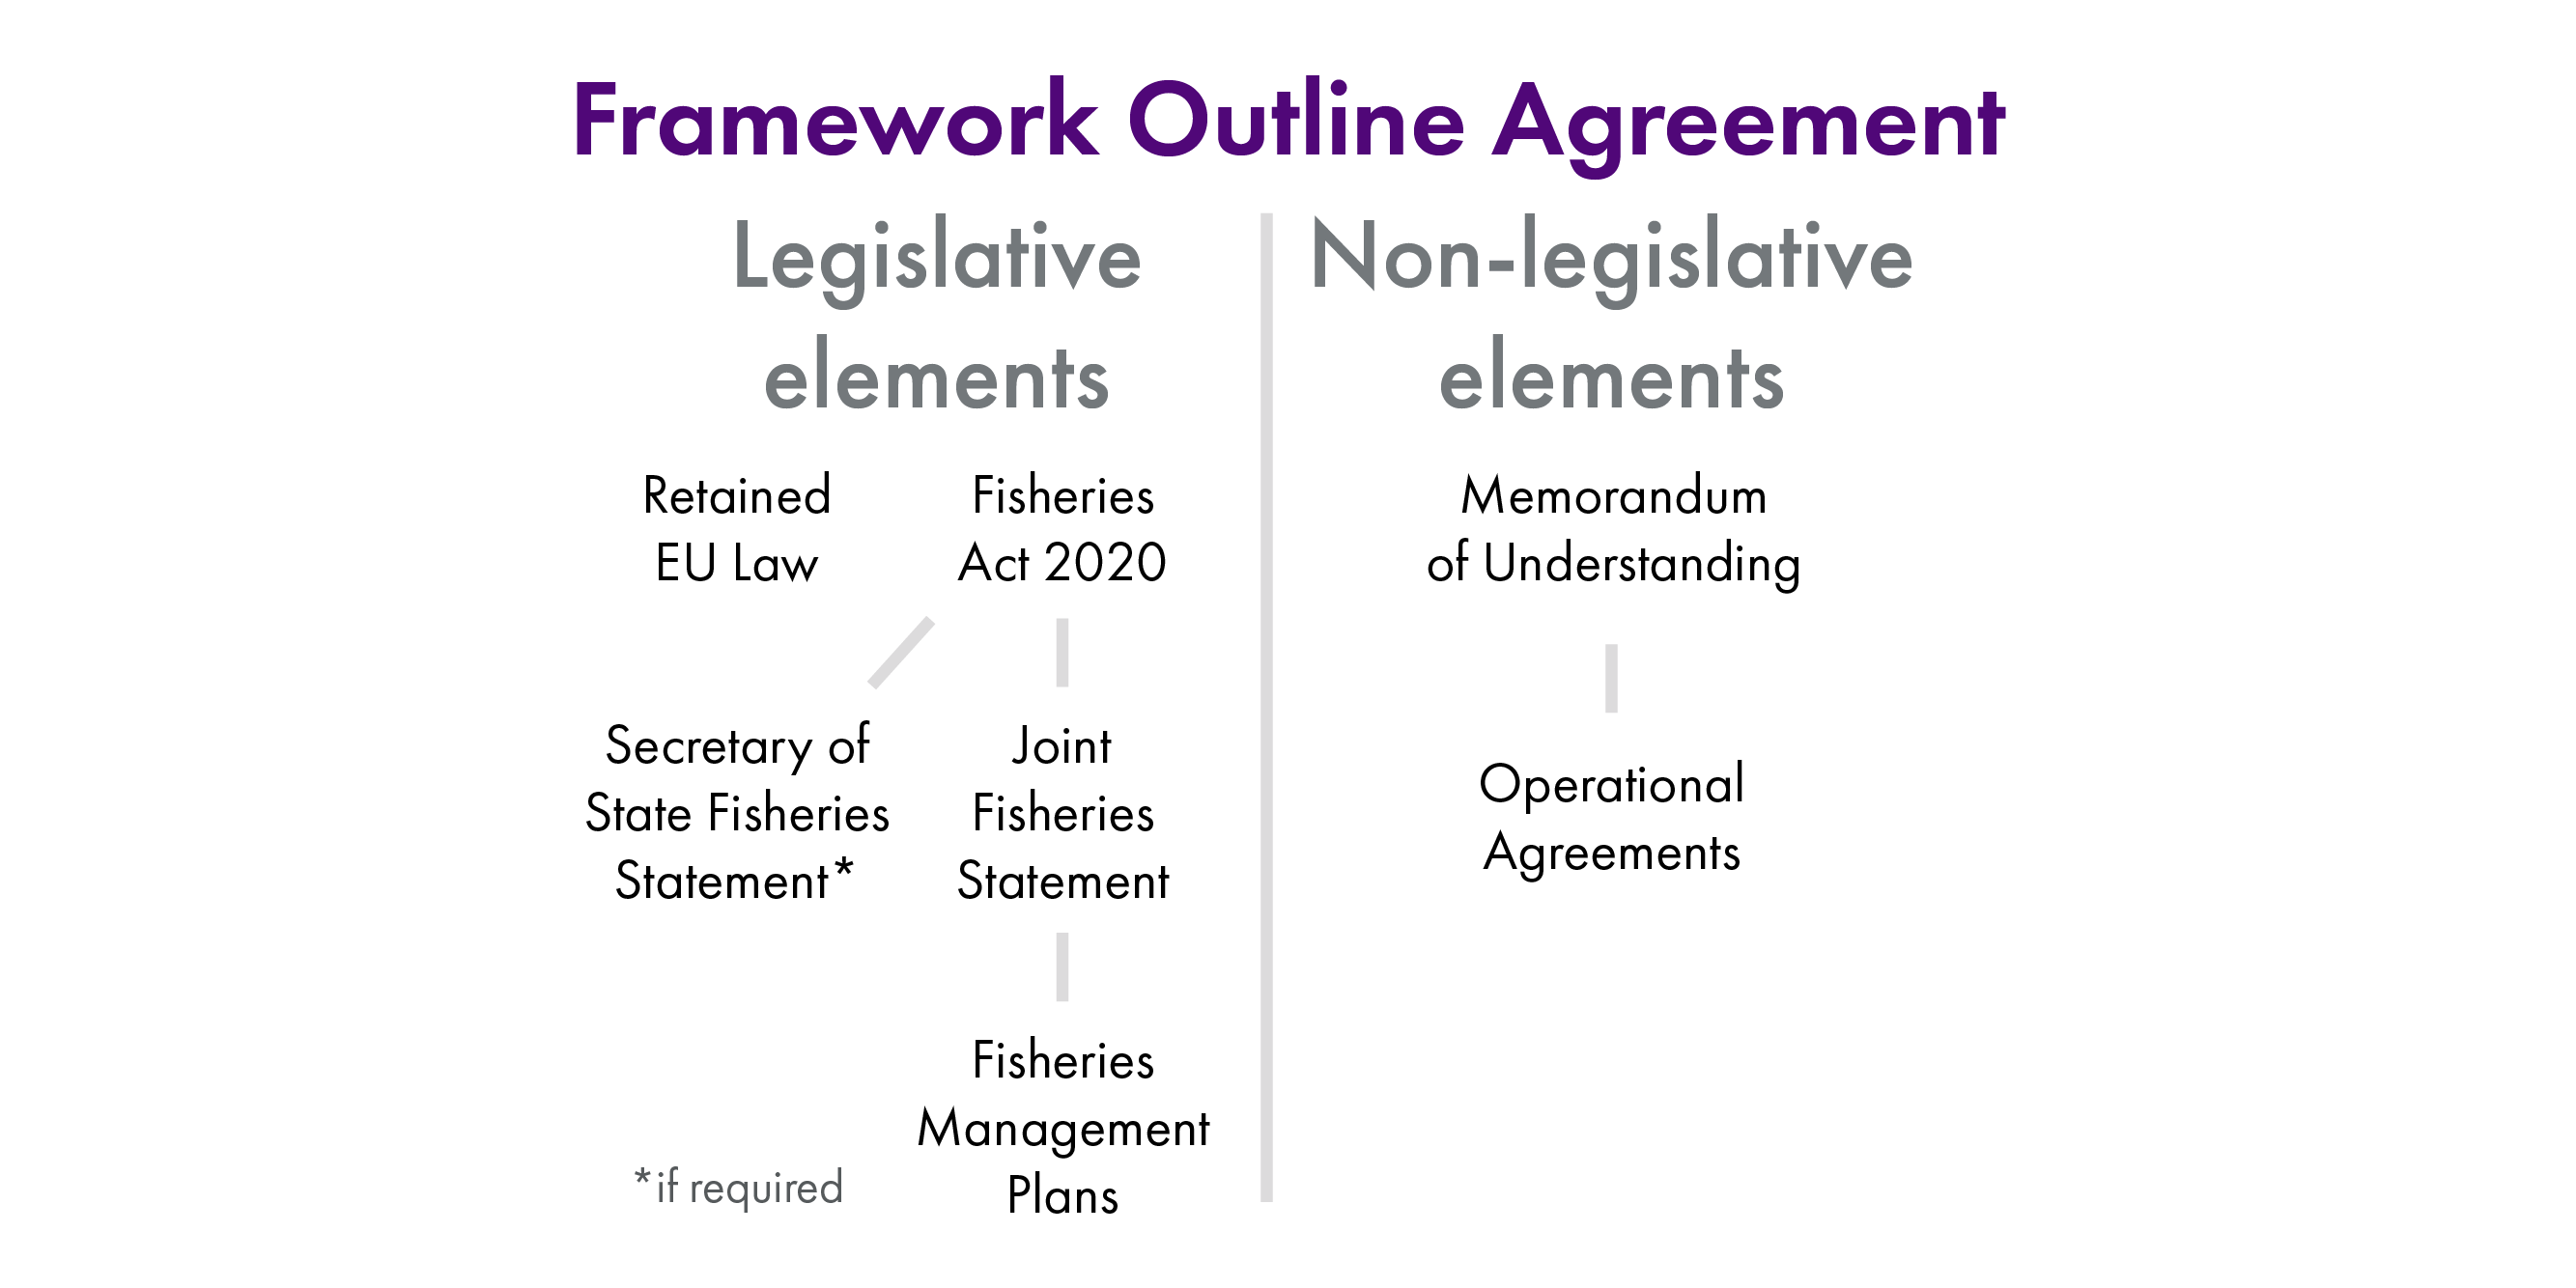 The diagram shows different elements of the framework, divided into legislative and non-legislative. On the legislative side, there is Retained EU law and the Fisheries Act 2020, which in turn includes the Joint Fisheries Statement, Fisheries Management Plans and the Secretary of State Fisheries Statement if required. On the non-legislative side, there is the Memorandum of Understanding and associated Operational Agreements.